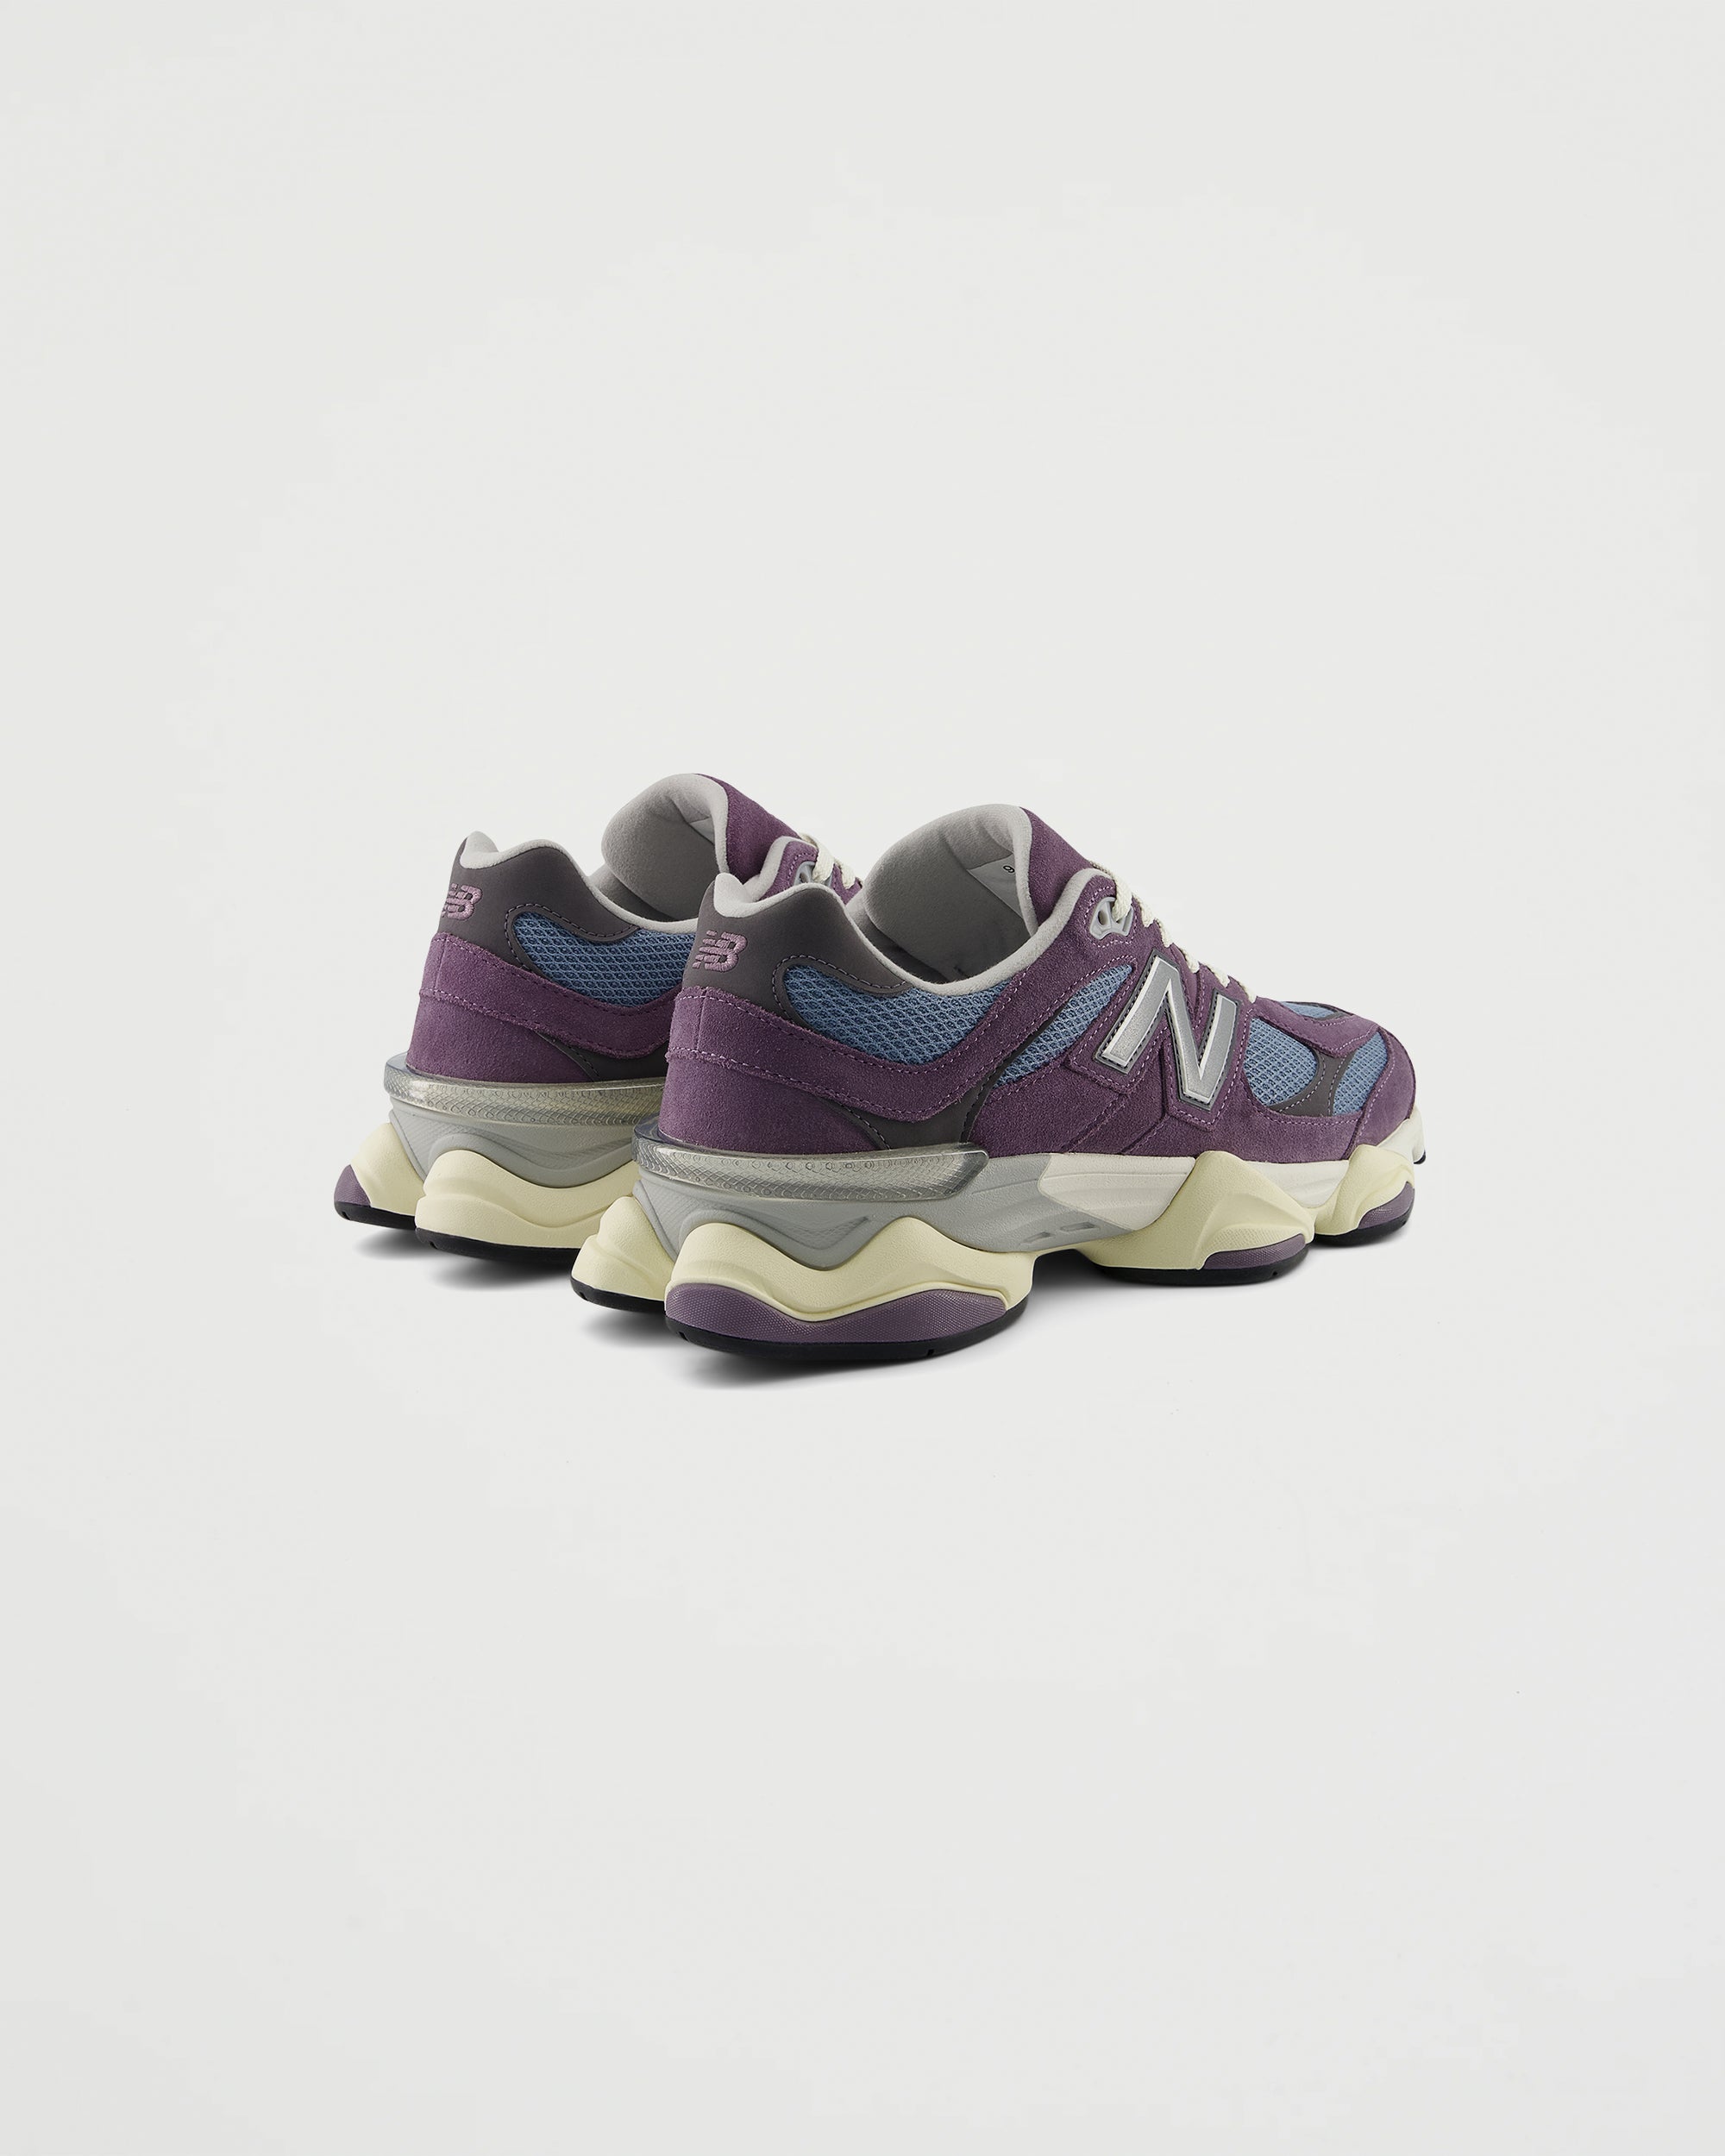 New Balance 9060 SFA Shadow Shoes Sneakers Unisex